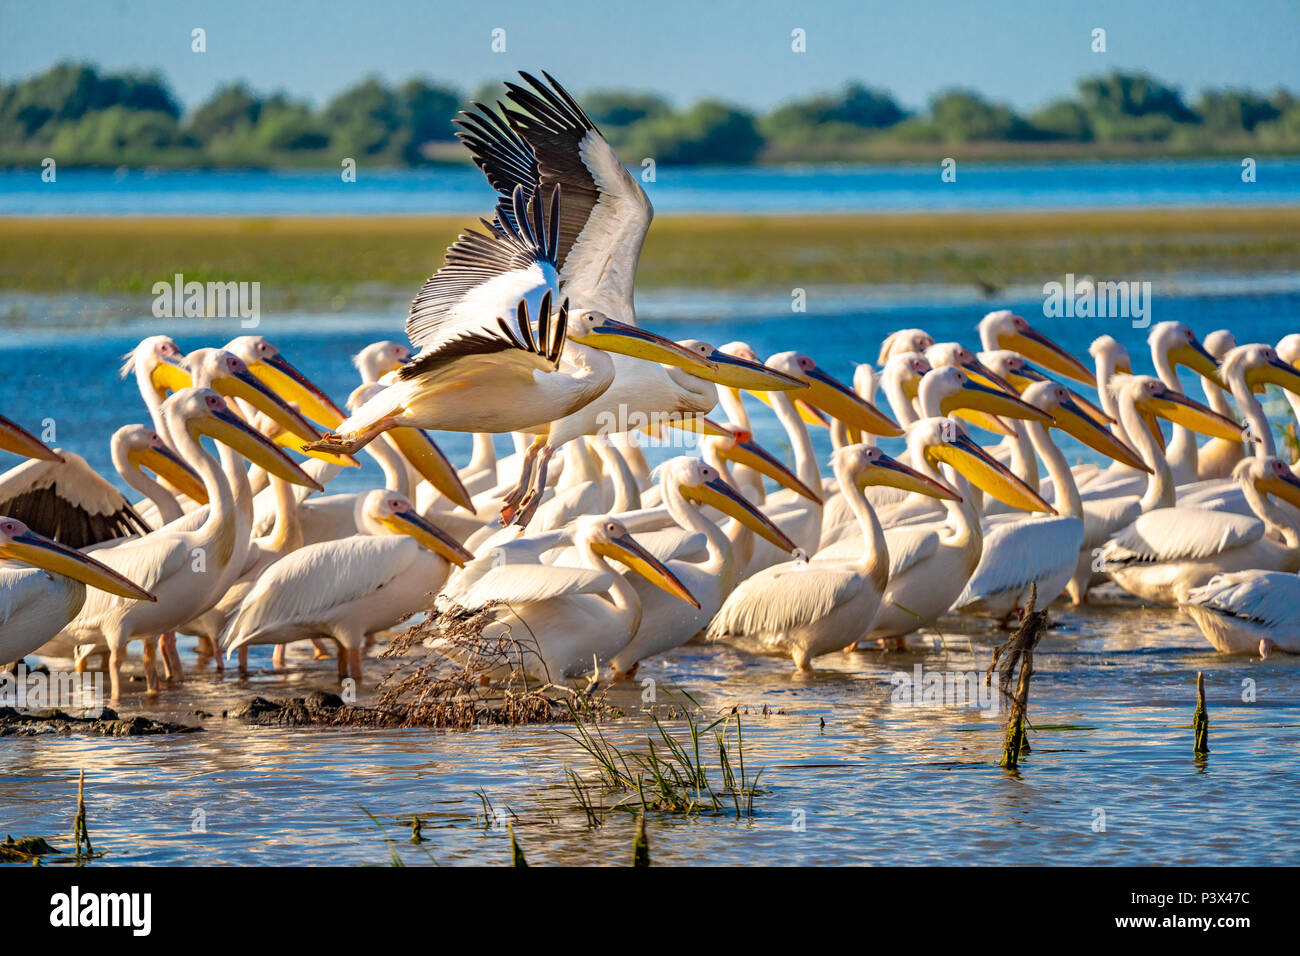 Pelicans in the Danube Delta, Romania. A common sight for the tourist visiting the Danube Delta for birdwatching Stock Photo